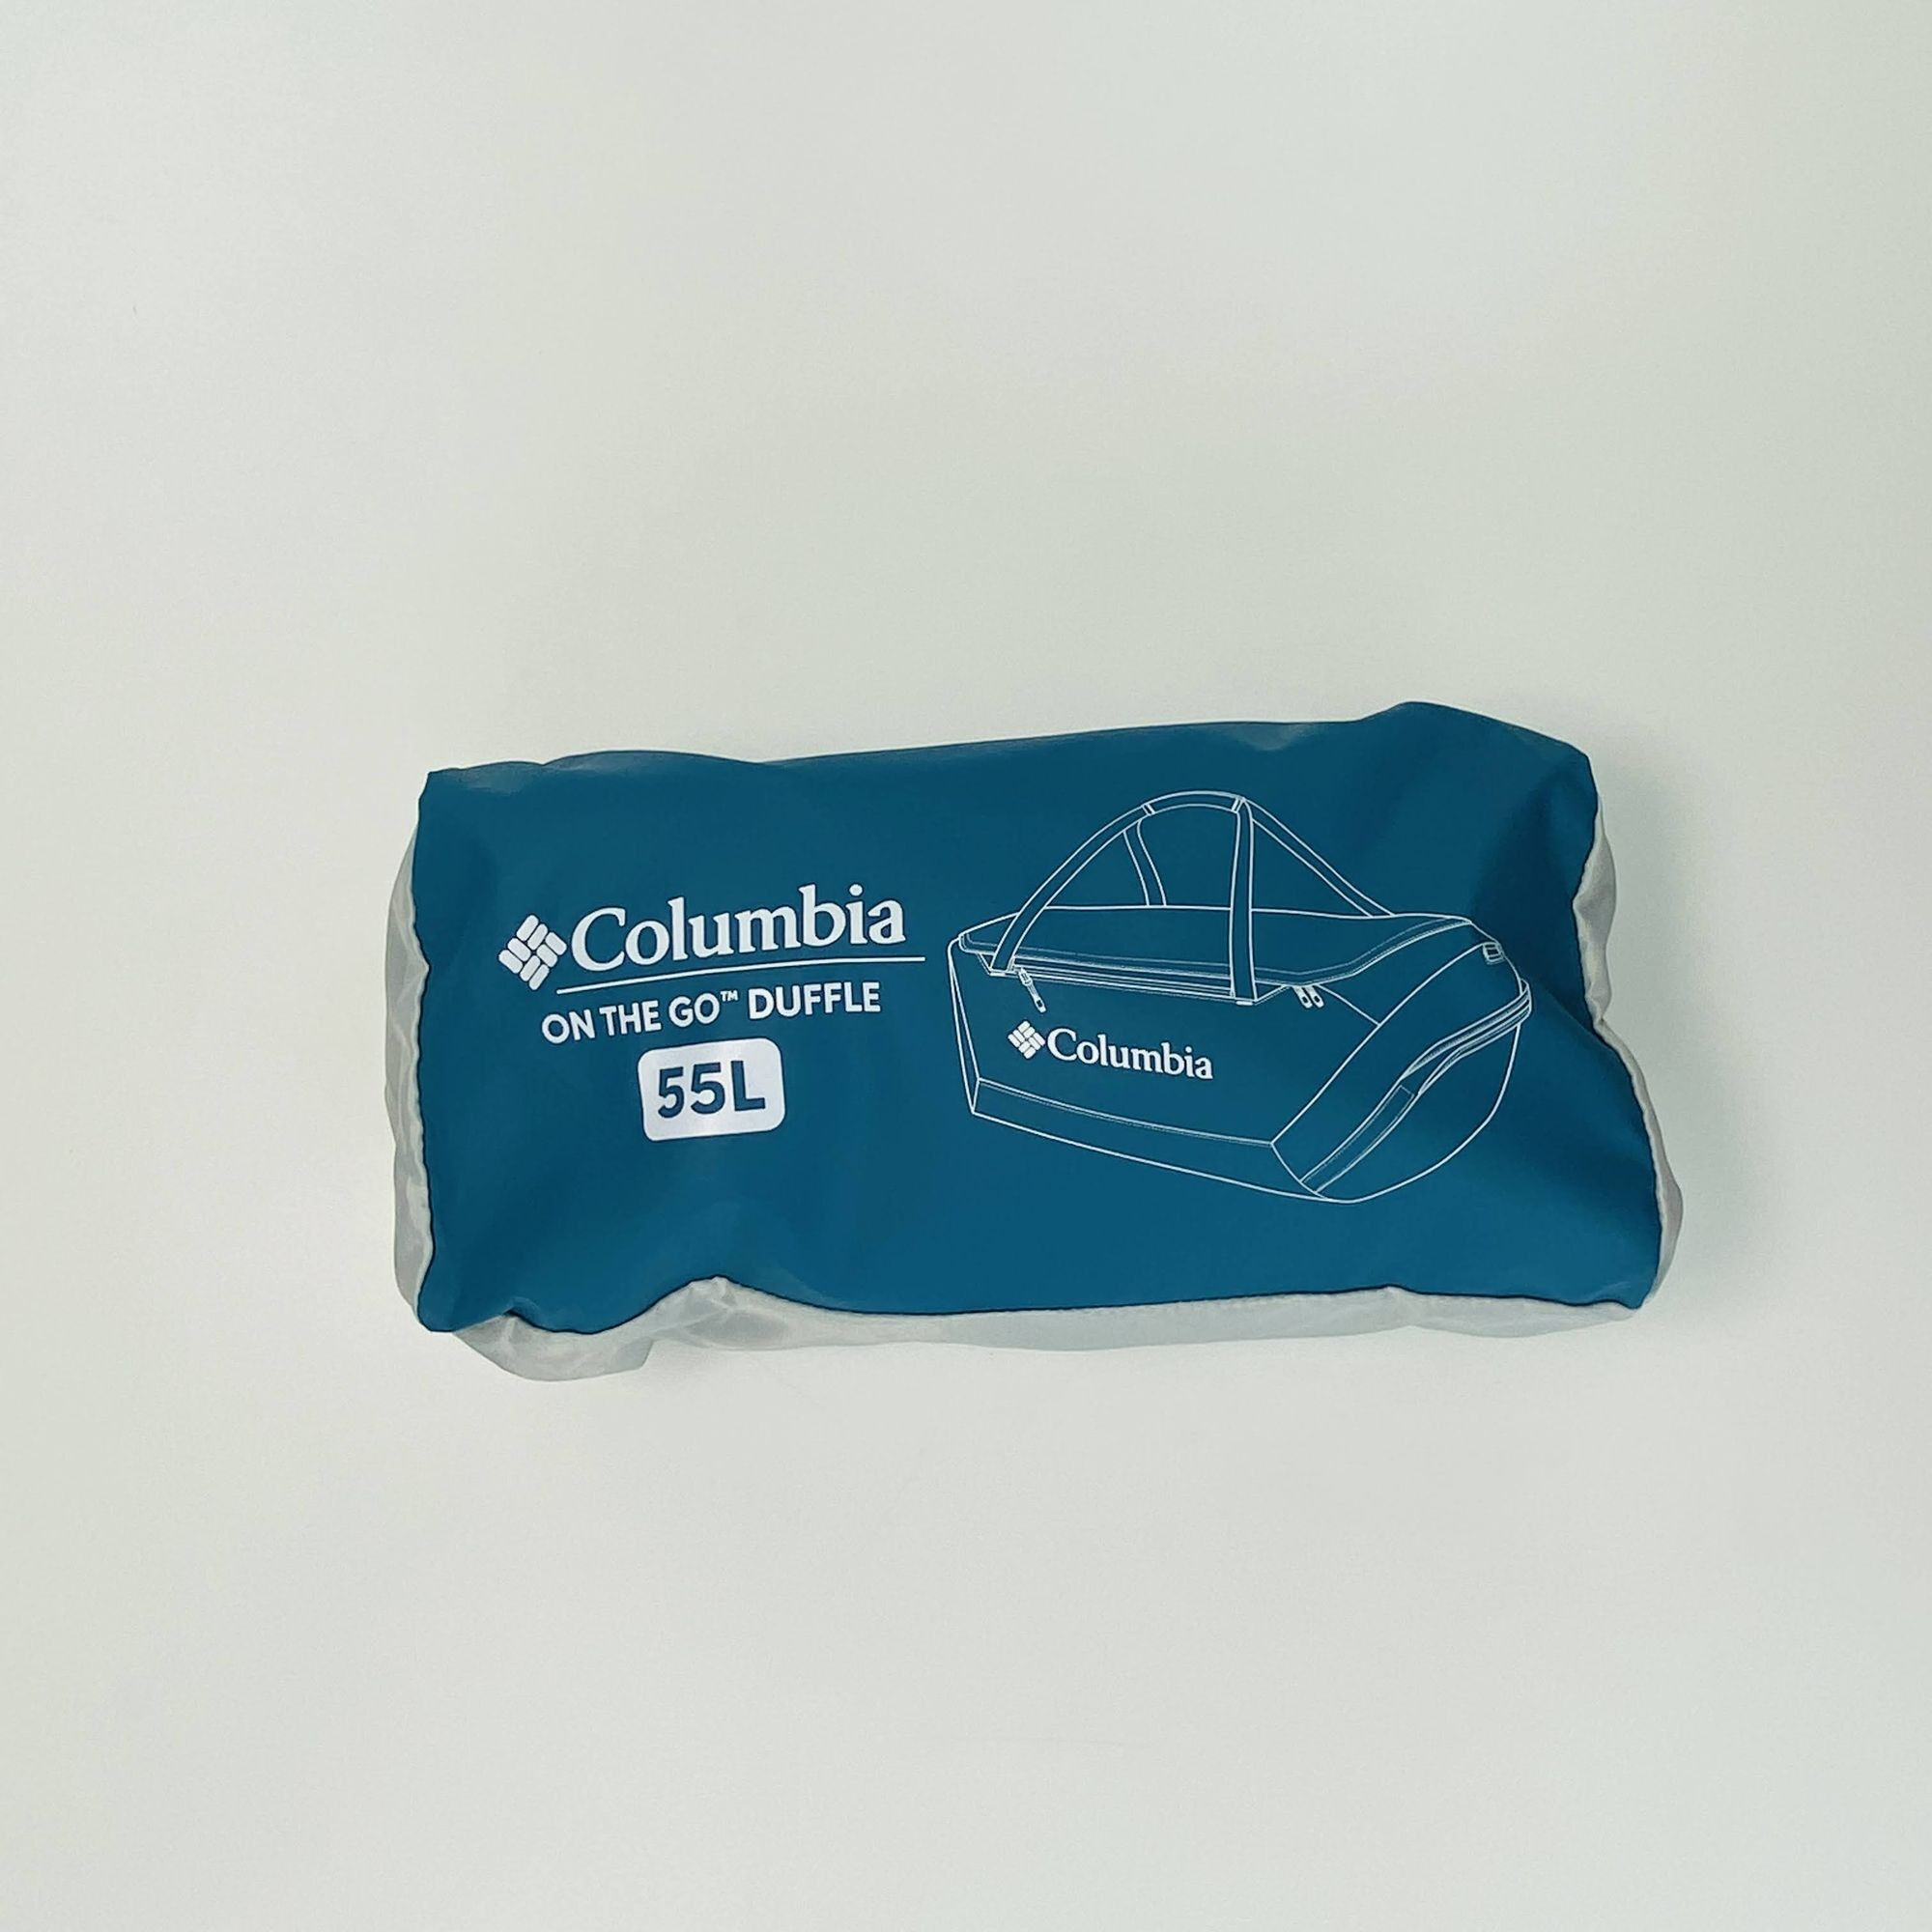 Columbia On The Go™ 55L Duffle - Seconde main Duffel - Bleu - Taille unique | Hardloop